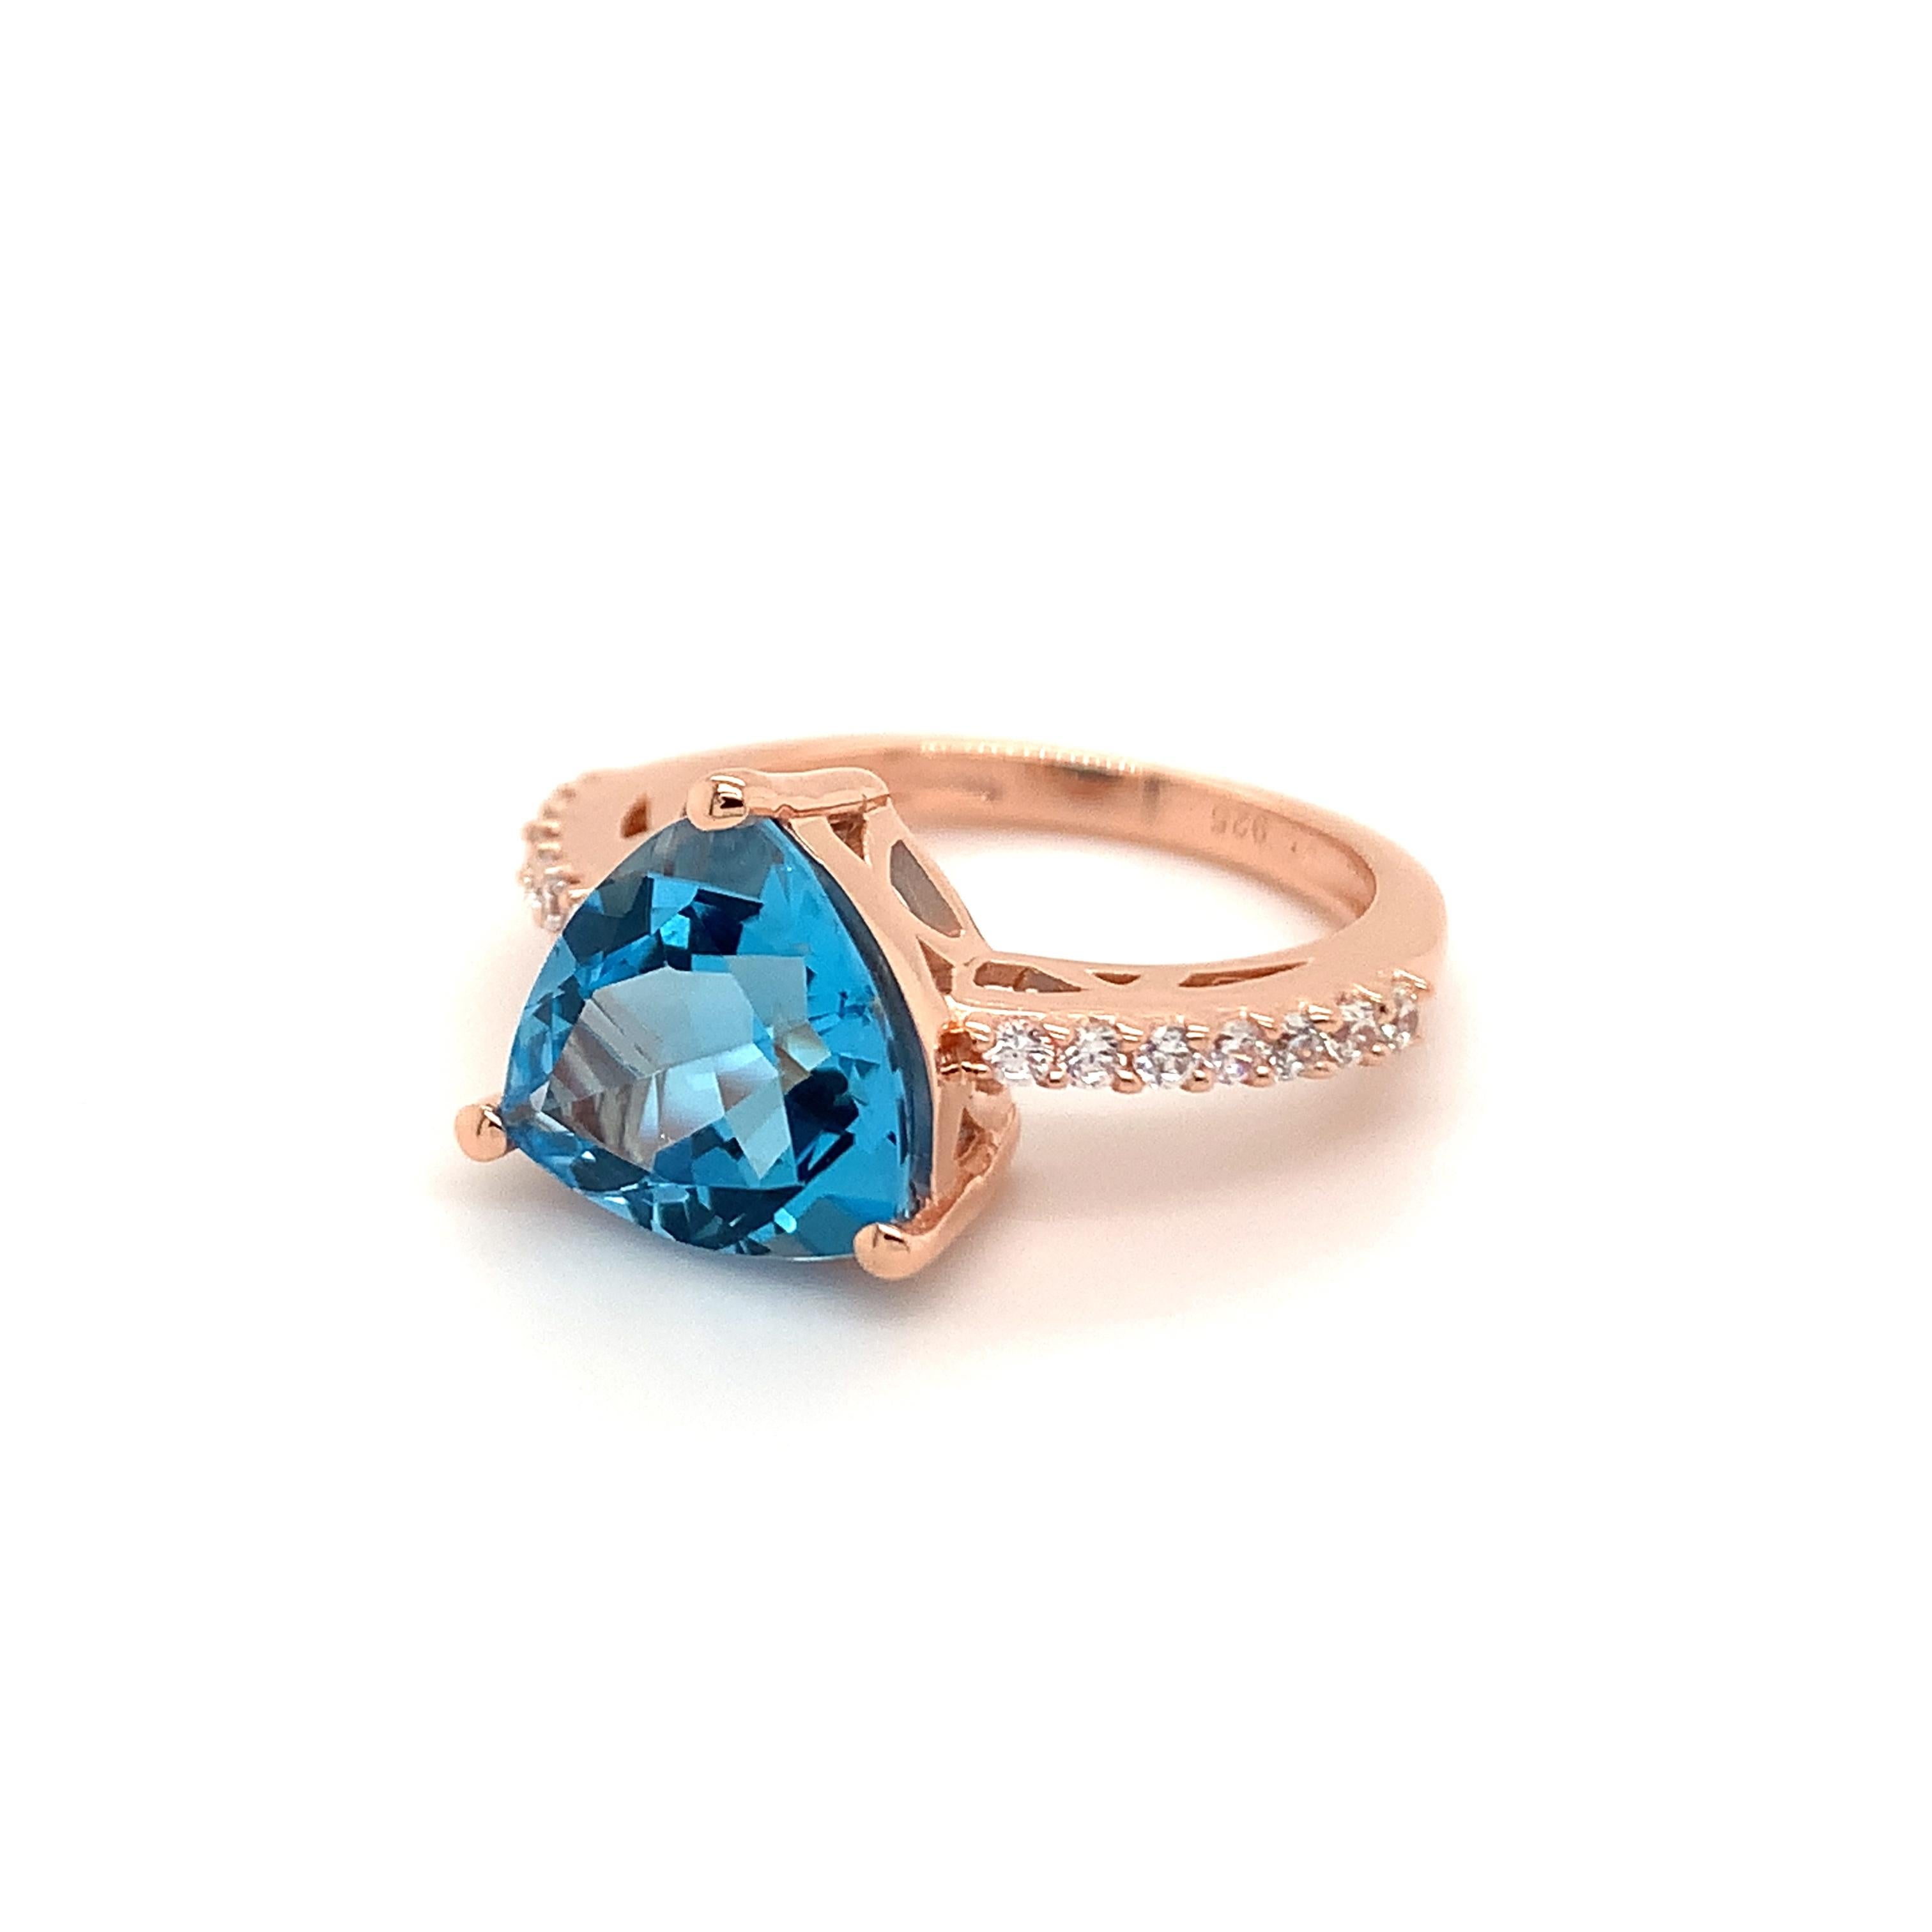 Trillion Shape Swiss Blue Topaz Gemstone beautifully crafted with CZ in a Ring. A fiery Blue color December Birthstone. For a special occasion like Engagement or Proposal or may be as a gift for a special person.

Primary Stone Size - 10x10mm